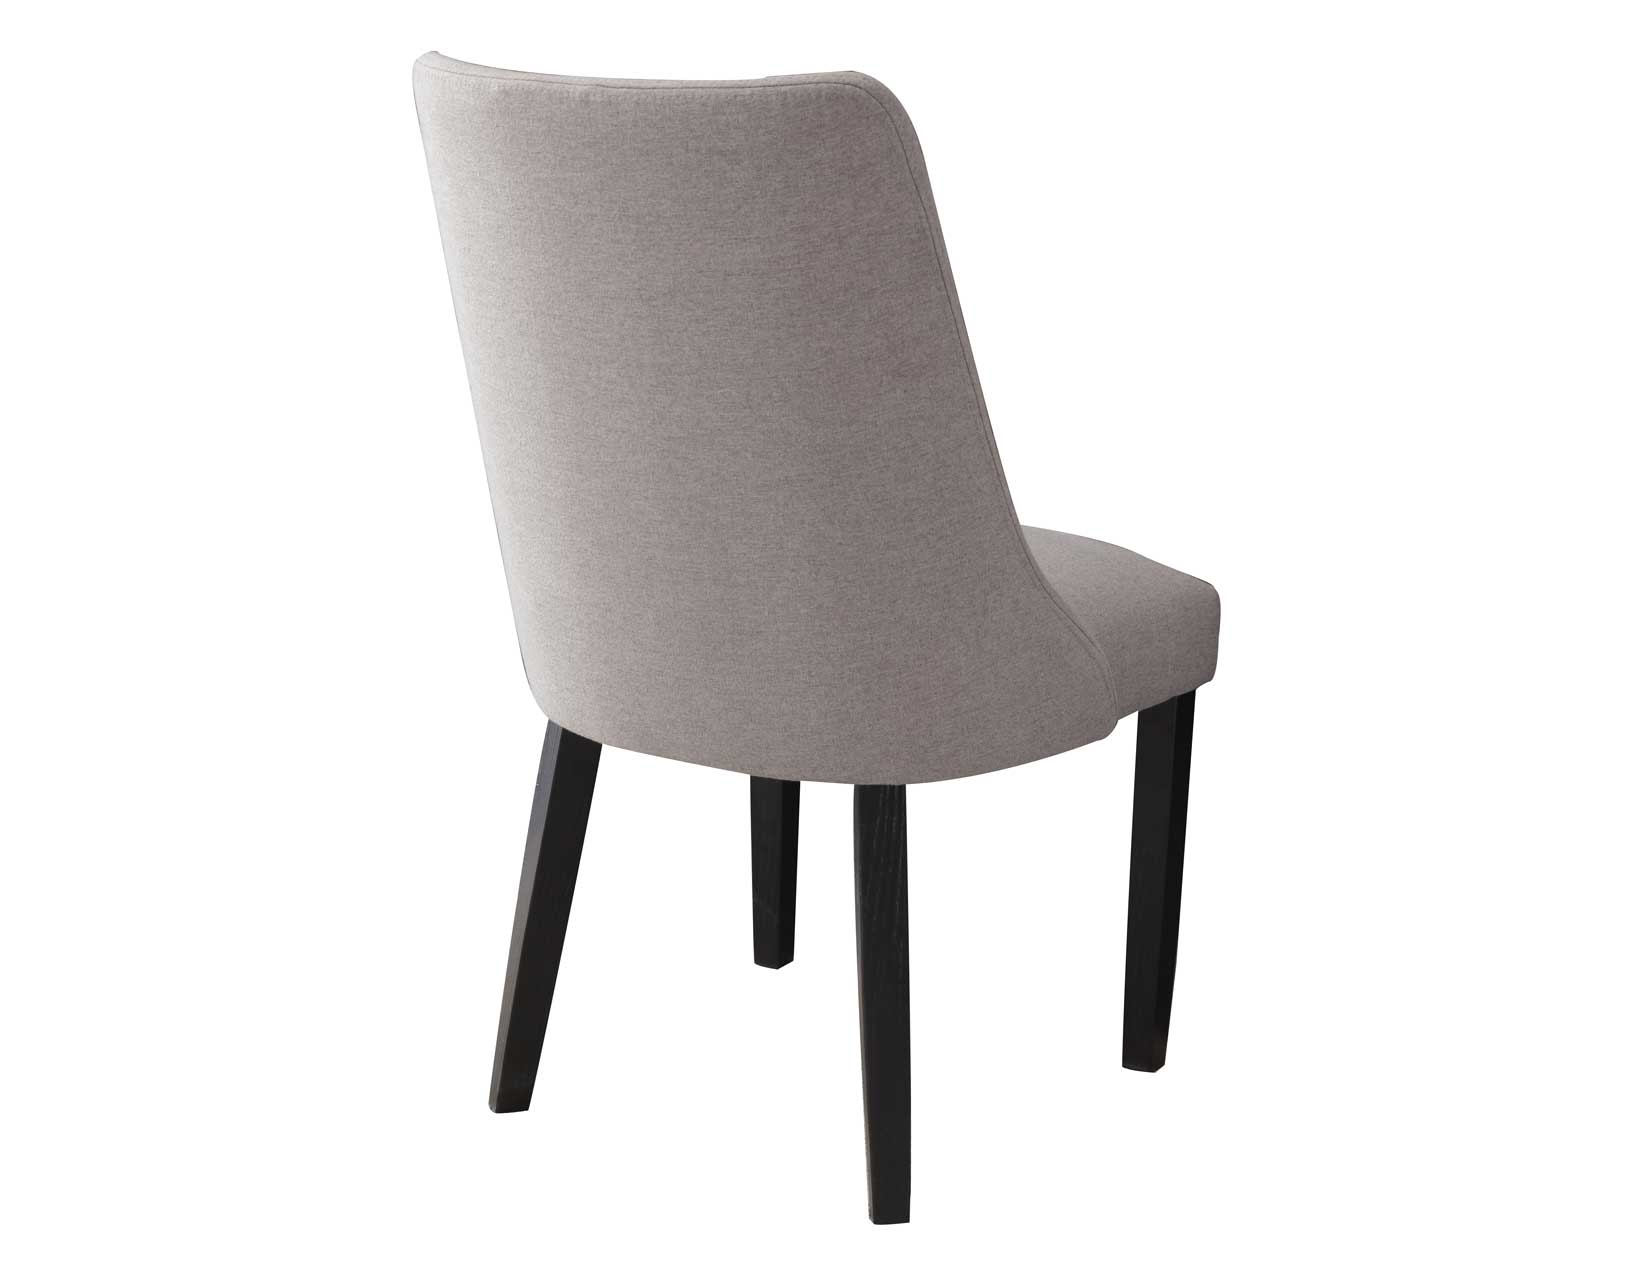 Xena Upholstered Side Chair, Gray - Steve Silver Company